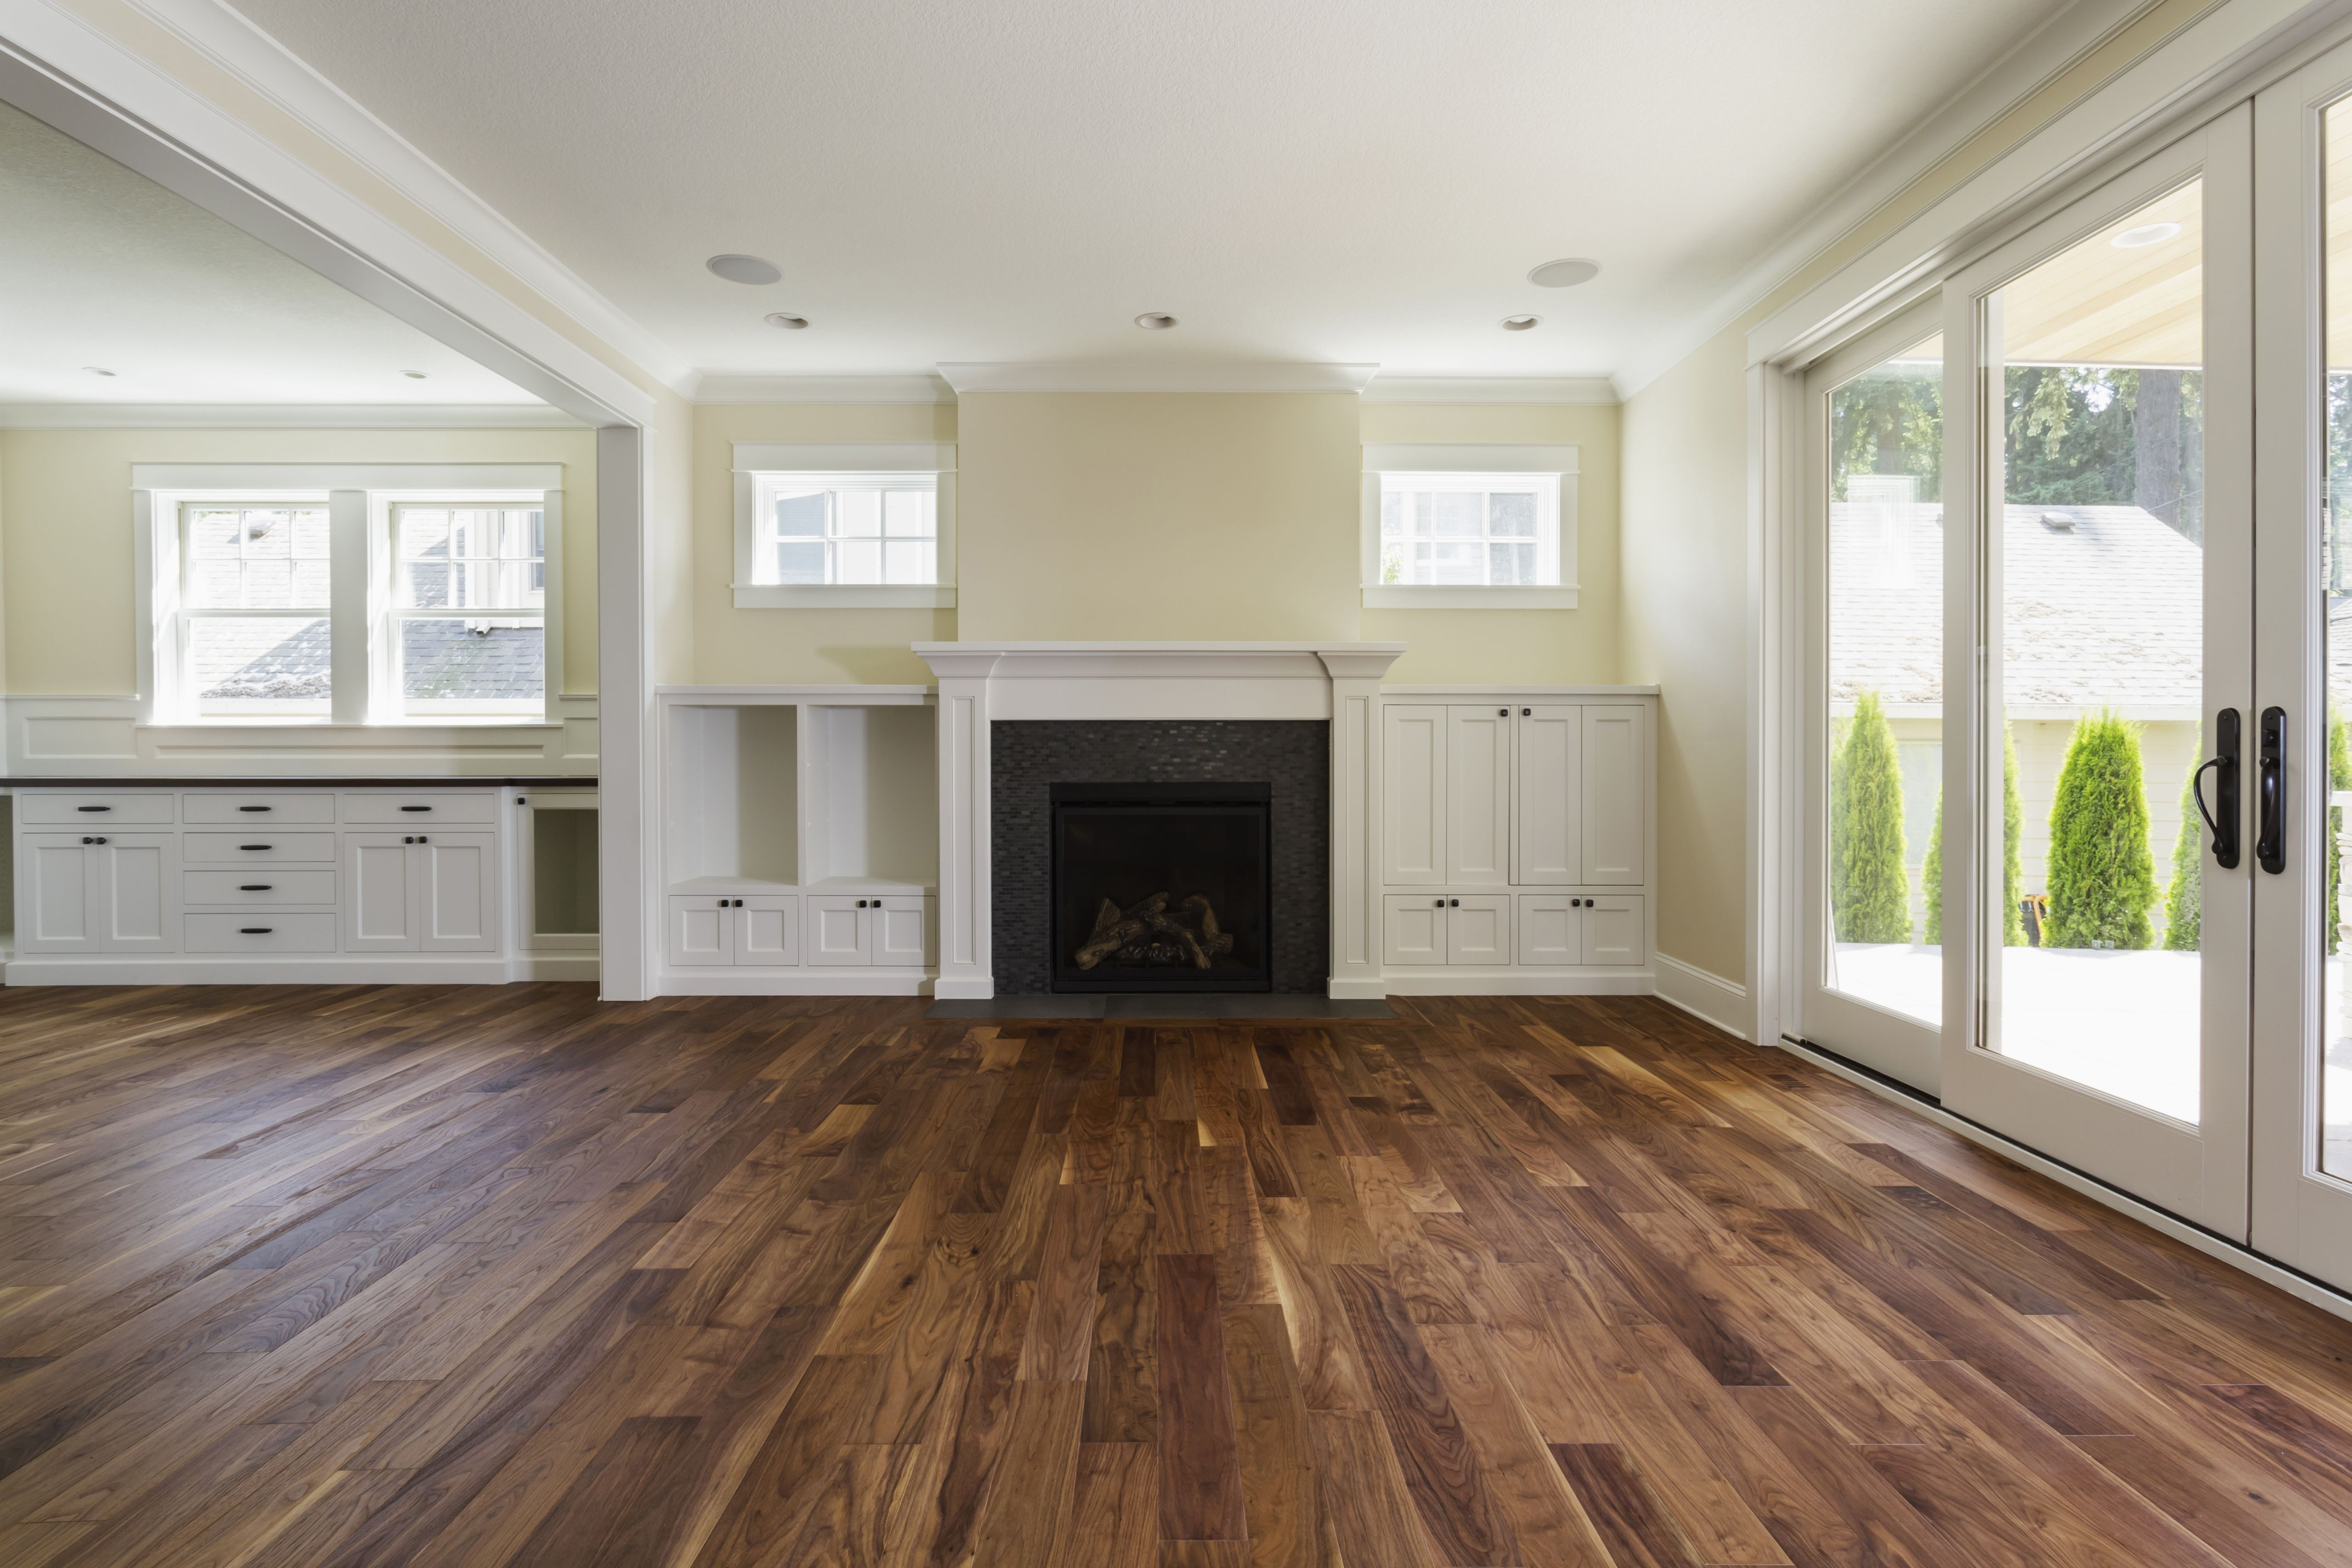 23 Awesome Installing Hardwood Floors On Stairs 2024 free download installing hardwood floors on stairs of the pros and cons of prefinished hardwood flooring intended for fireplace and built in shelves in living room 482143011 57bef8e33df78cc16e035397